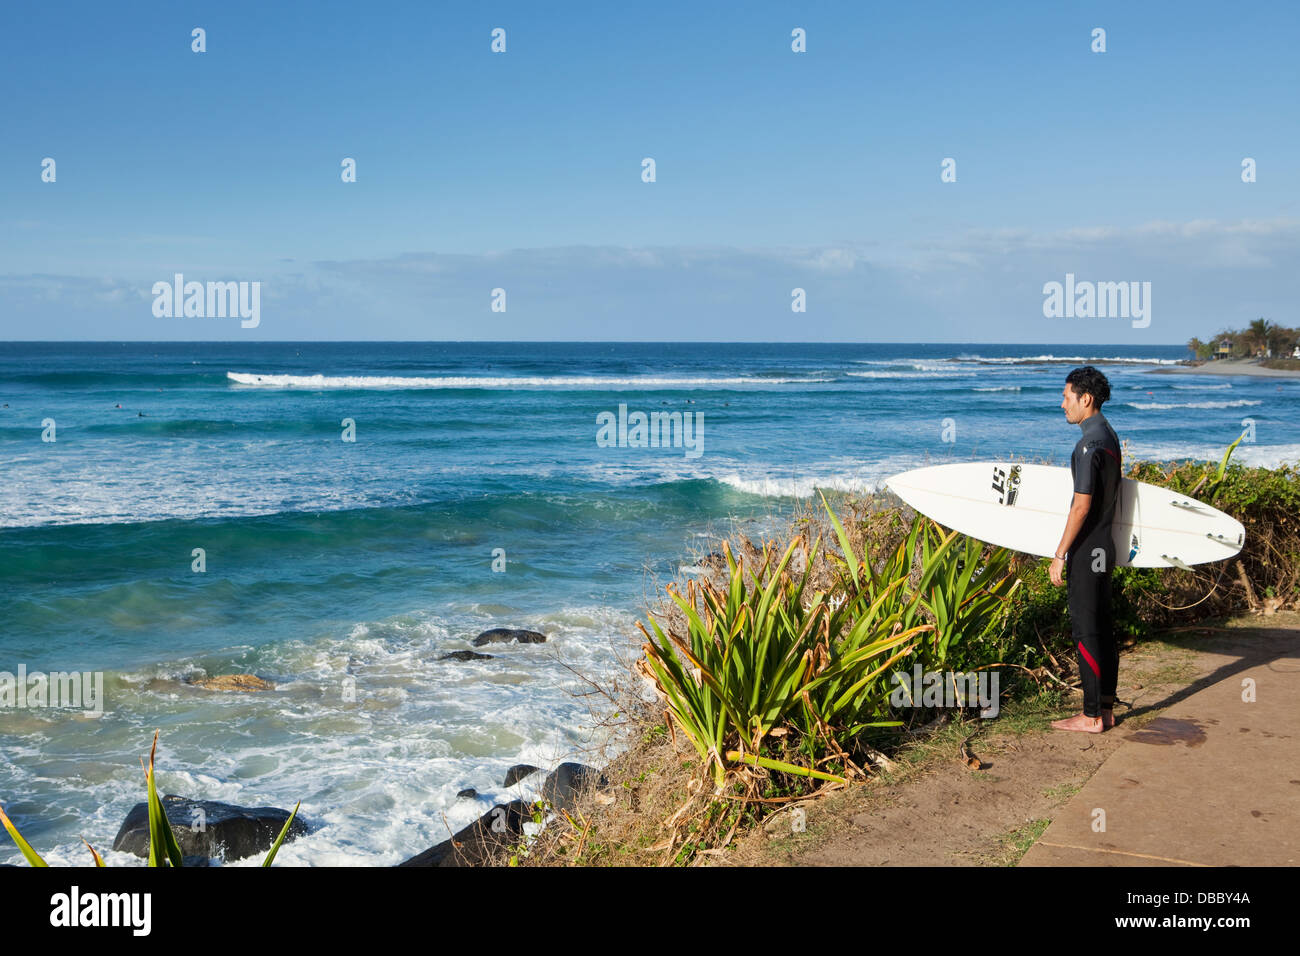 Surfer looking out to the waves at Greenmount Beach. Coolangatta, Gold Coast, Queensland, Australia Stock Photo